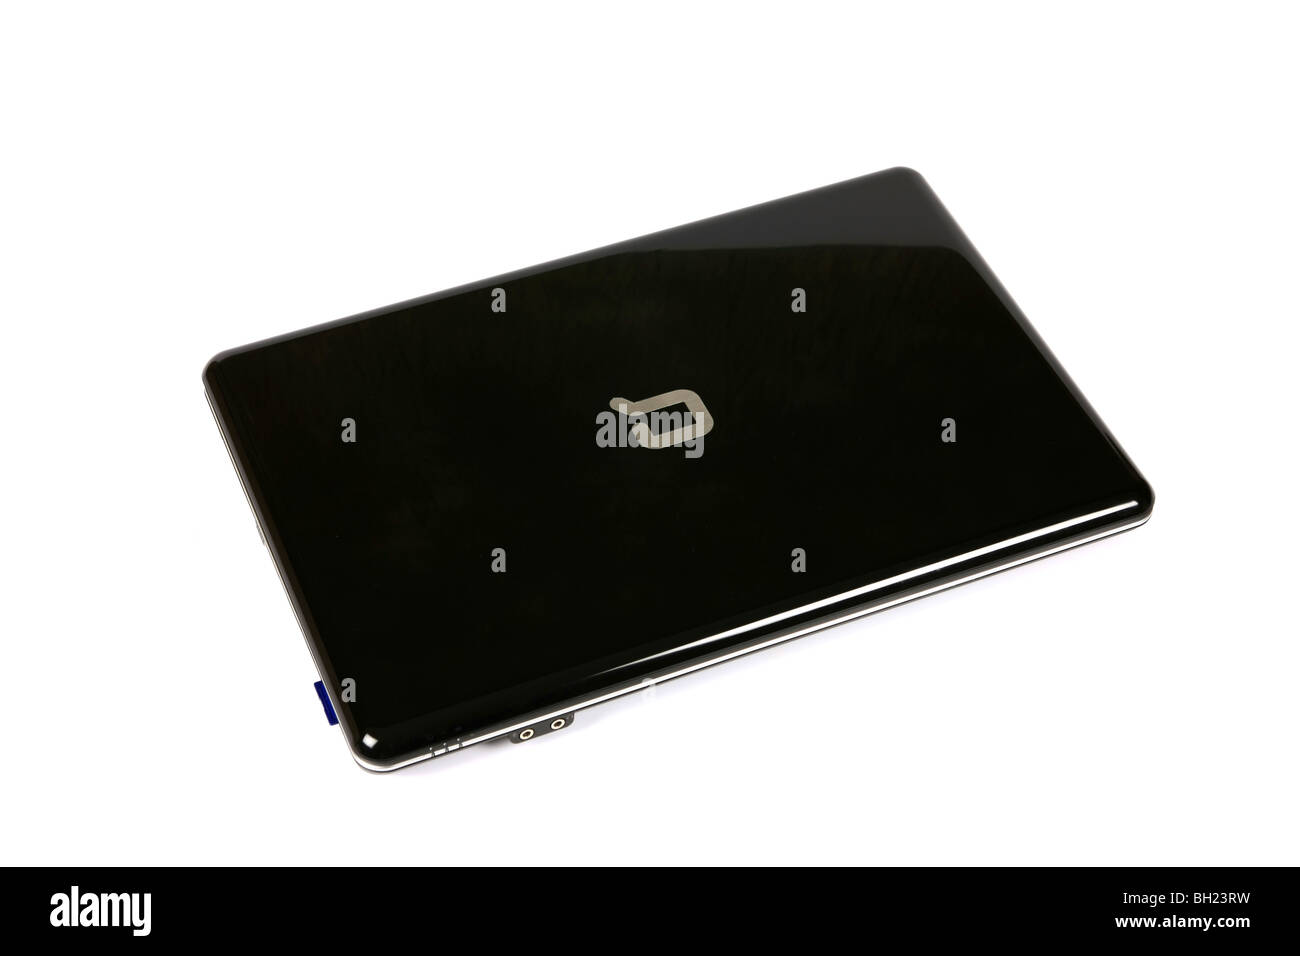 Black Compaq Laptop or Notebook portable computer against a white  background Stock Photo - Alamy